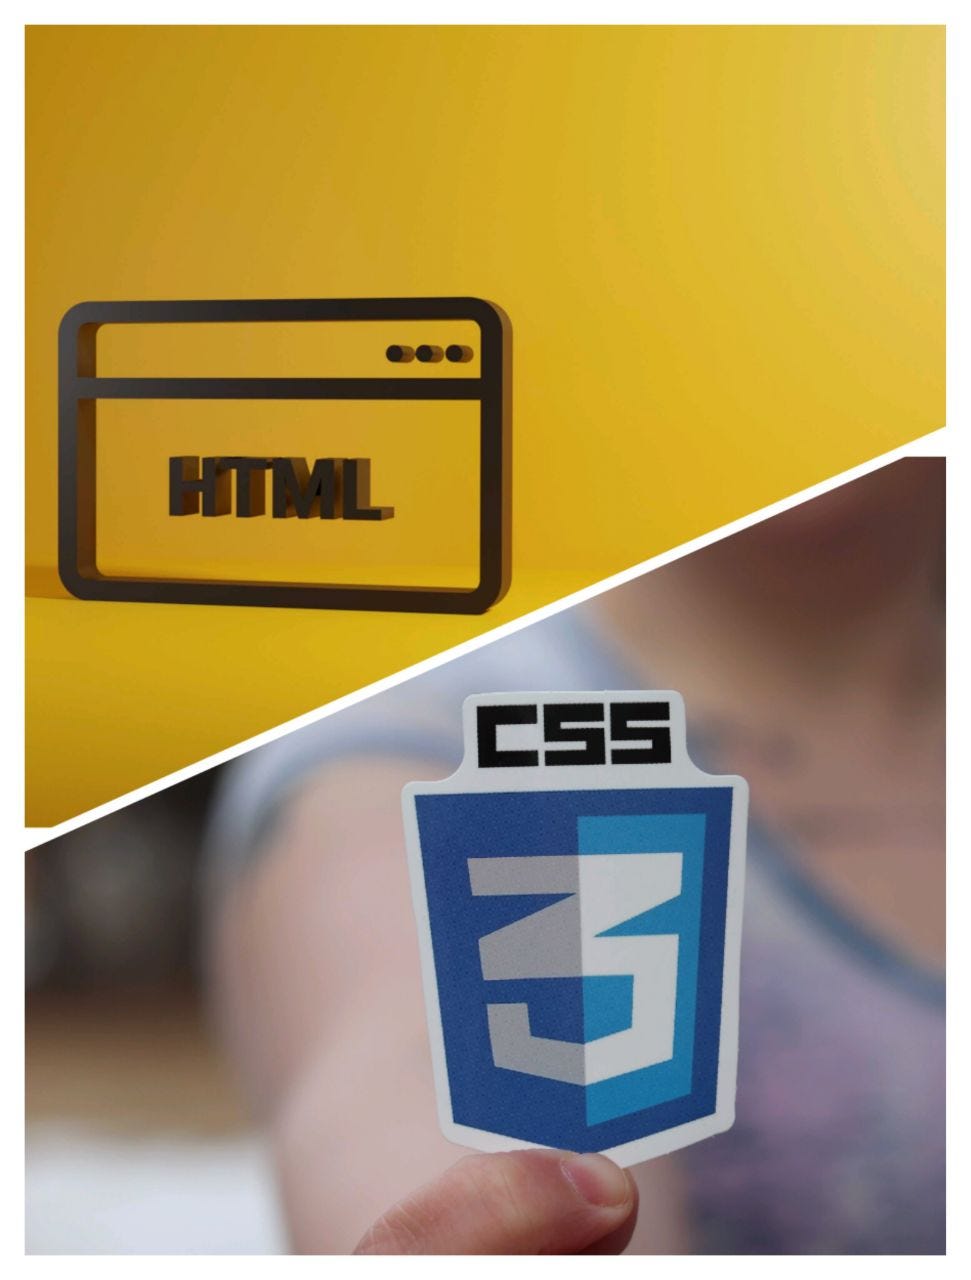 HTML and CSS Logo design in a college collage image with HTML to the top and CSS at the bottom.